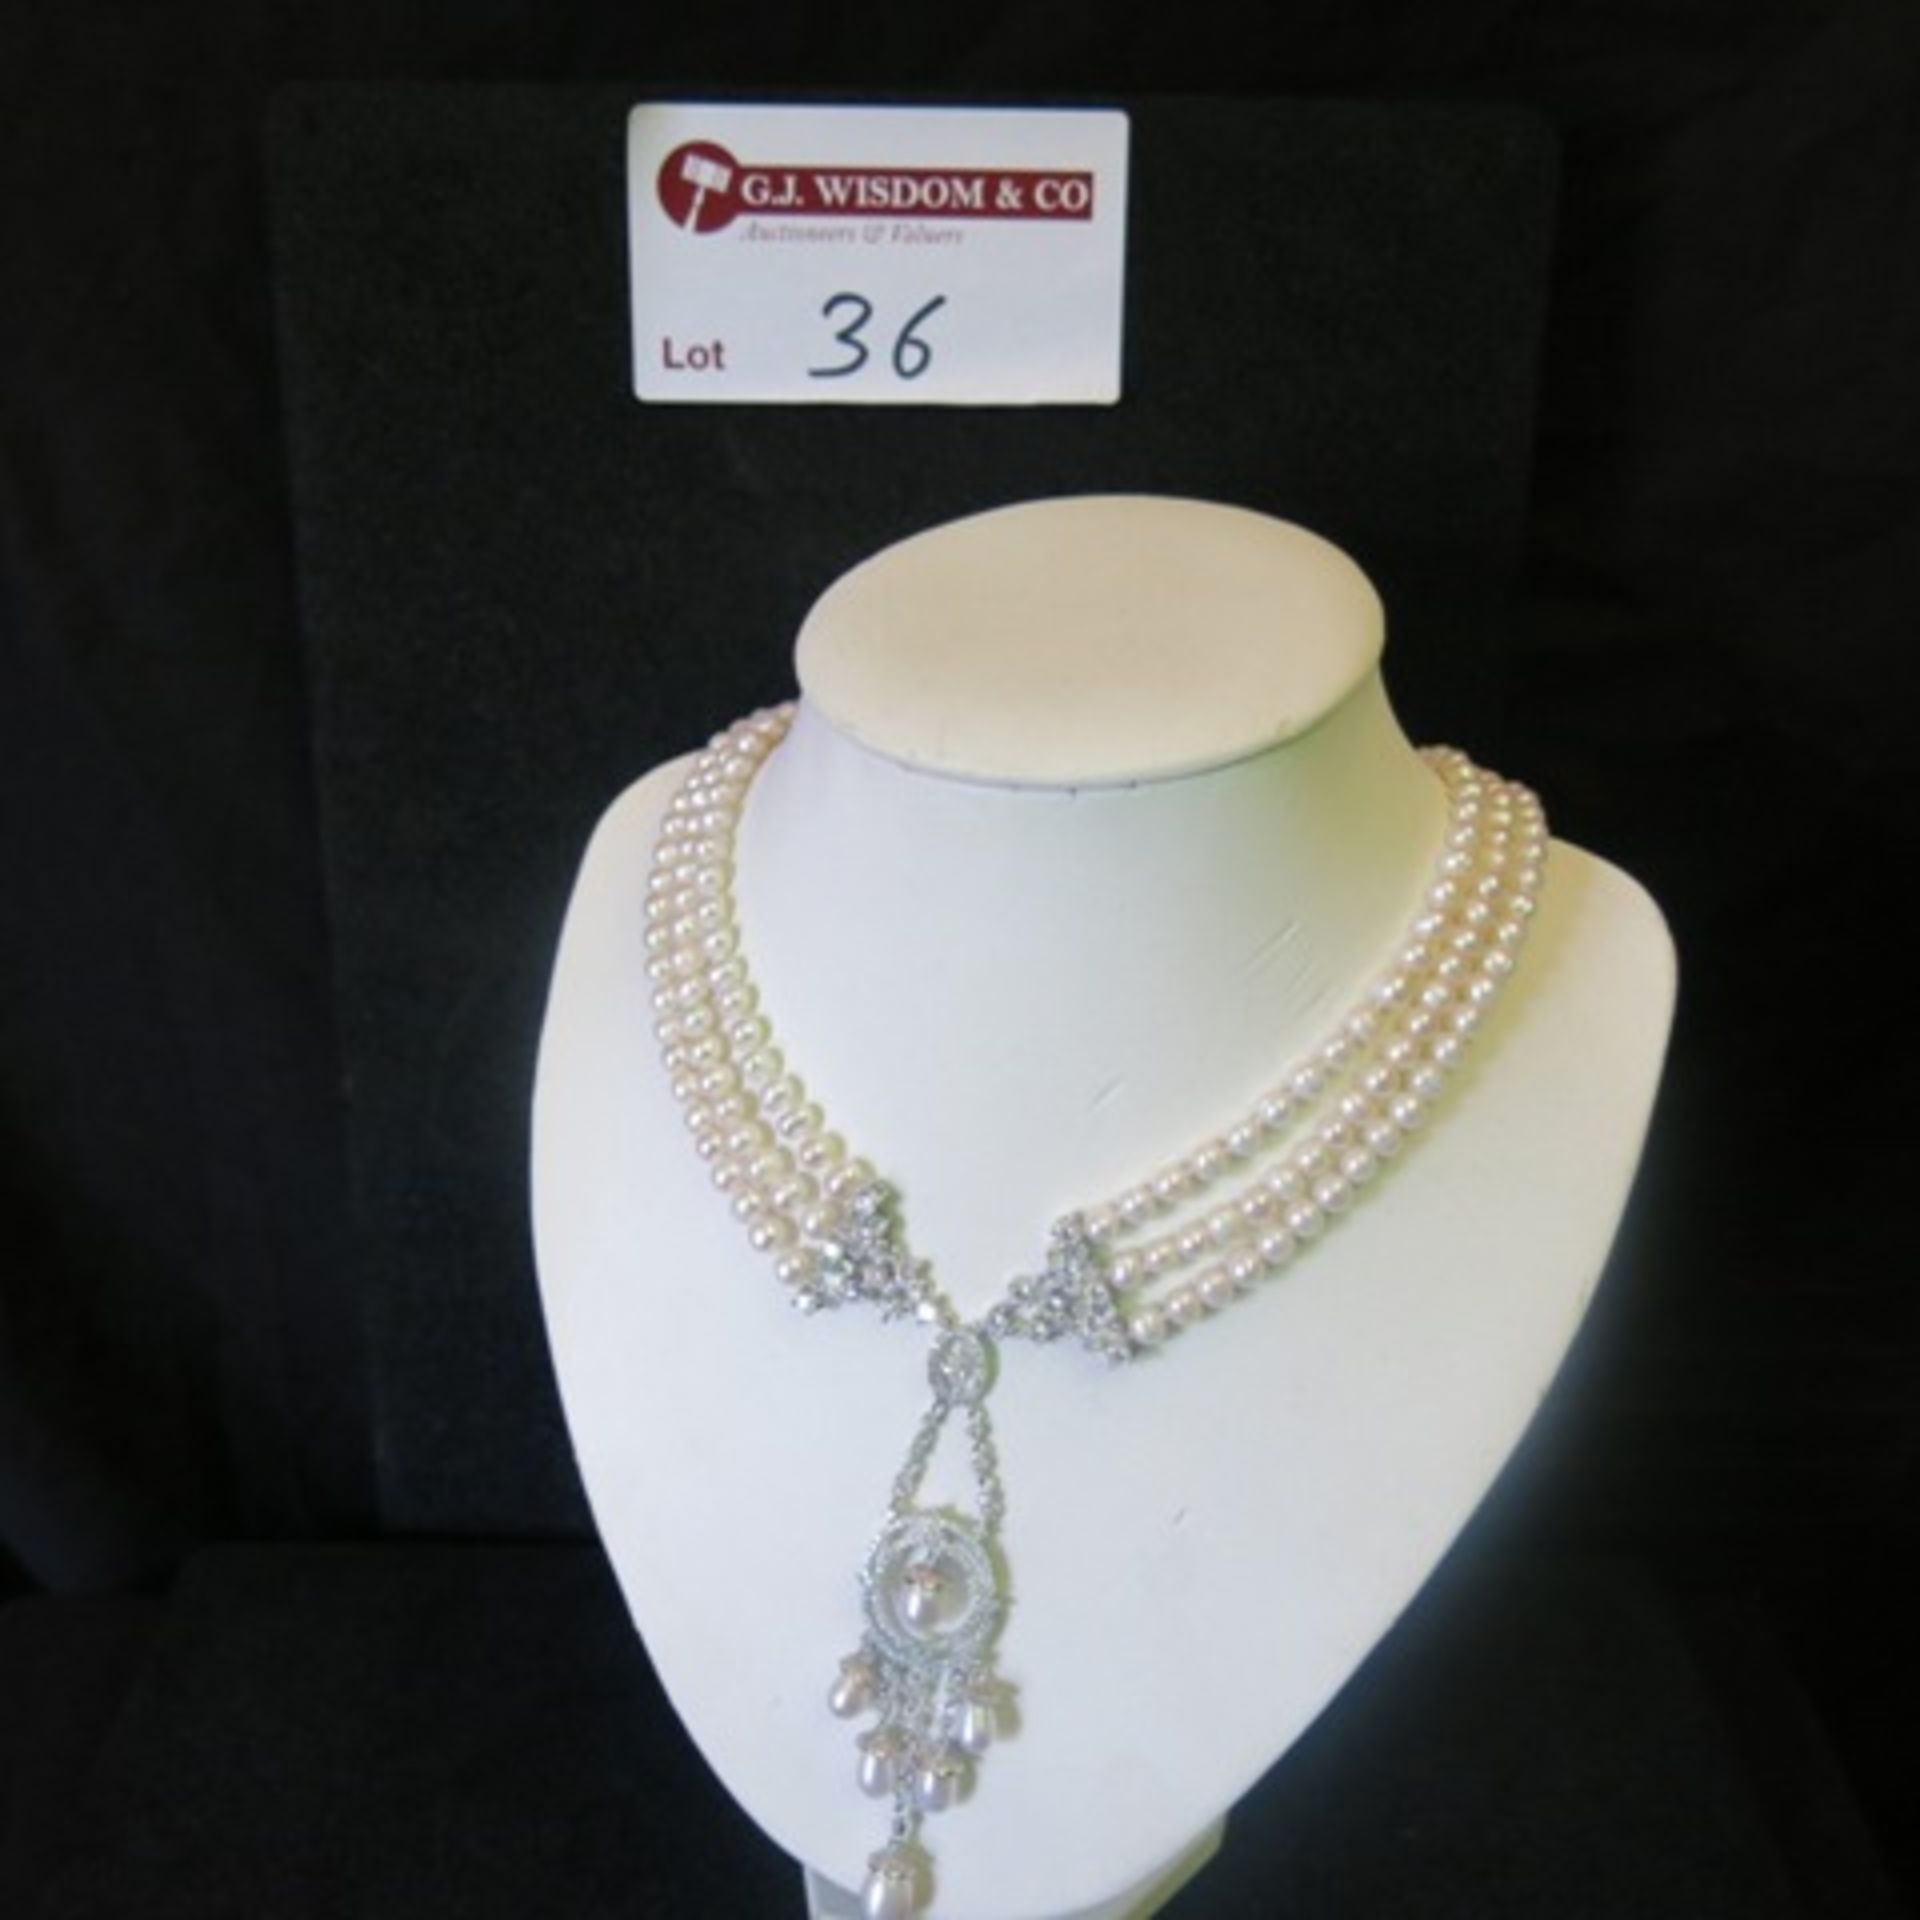 Triple Band Pearl Necklace (6mm) with Drop Centre with Clear Stones and White Metal & Pearls. RRP £